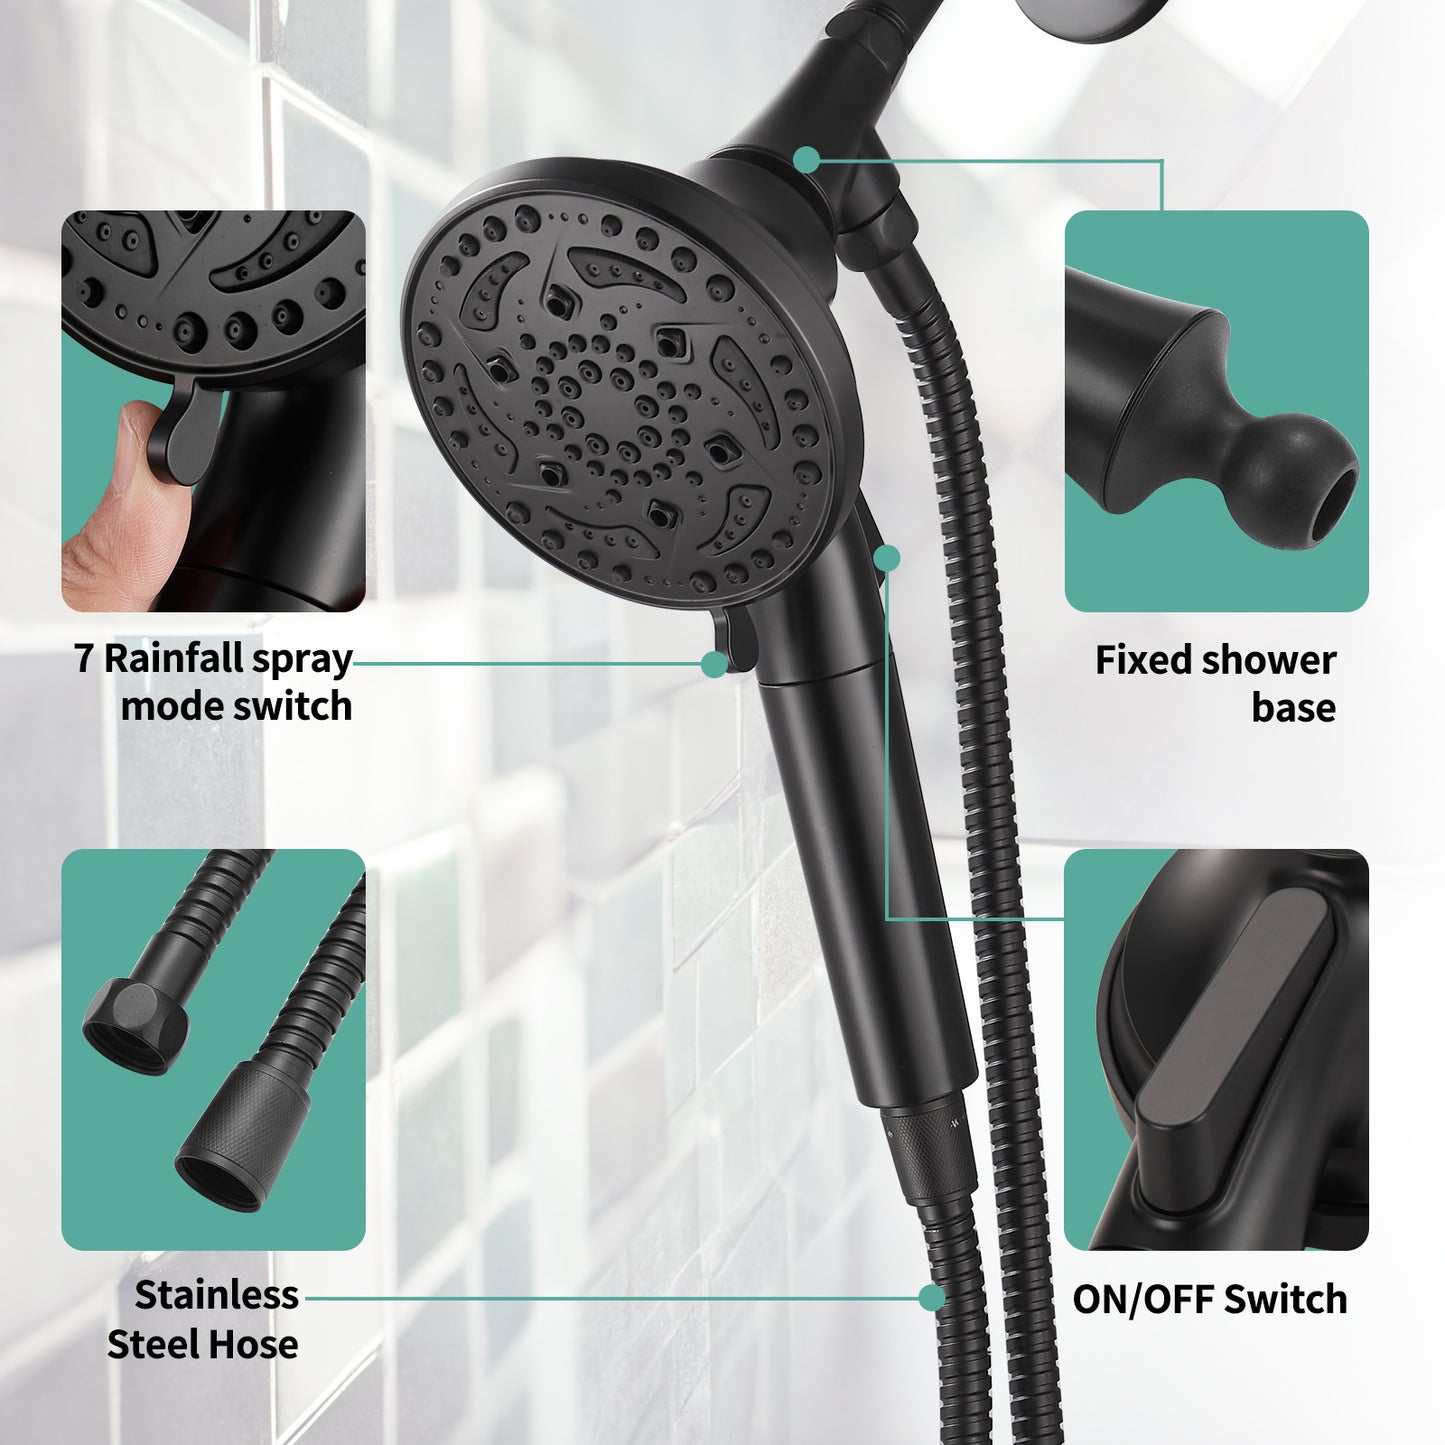 Cobbe Shower Faucet Set with Valve, Shower Trim Kit with 7-Spray Filtered Shower Head with Handheld, Shower head and handle set, Stainless Steel Hose(Valve Included)